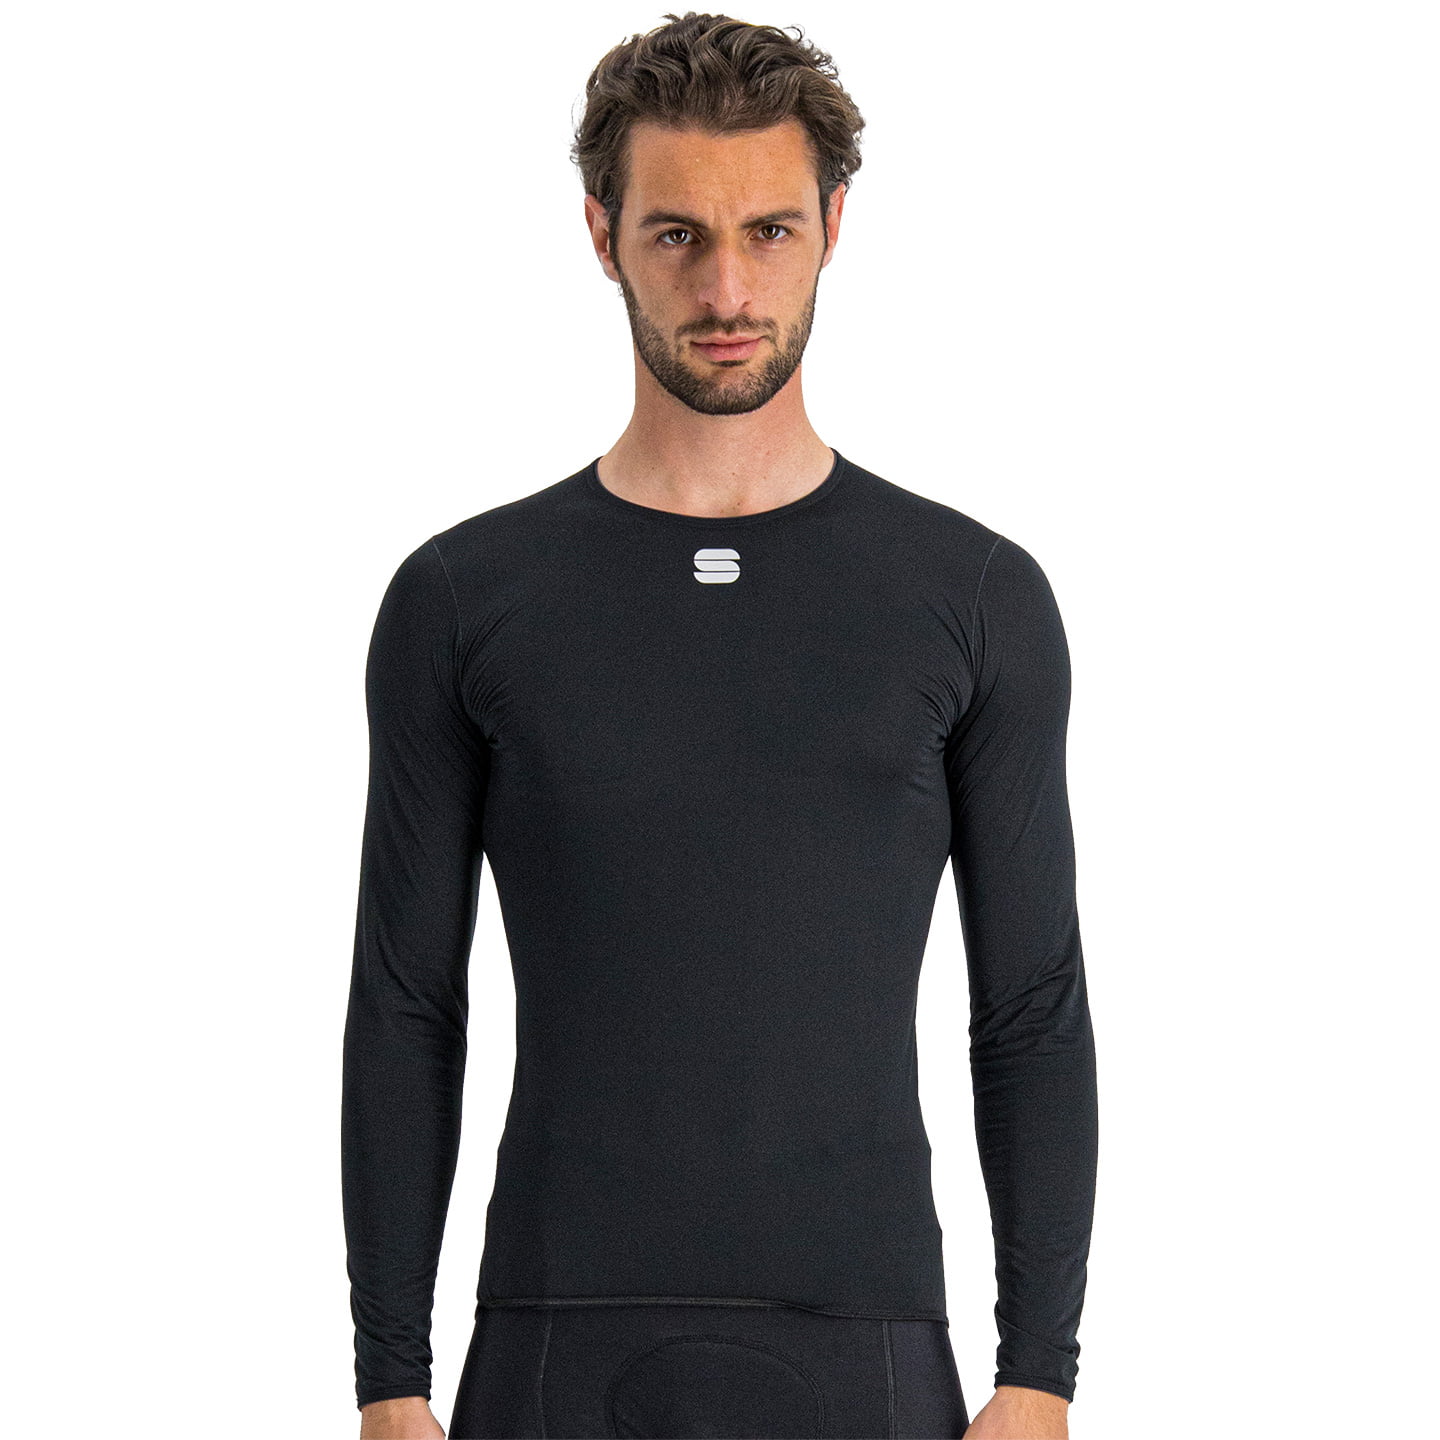 Sportful Midweight Long Sleeve Cycling Base Layer Base Layer, for men, size 2XL, Singlet, Cycle gear